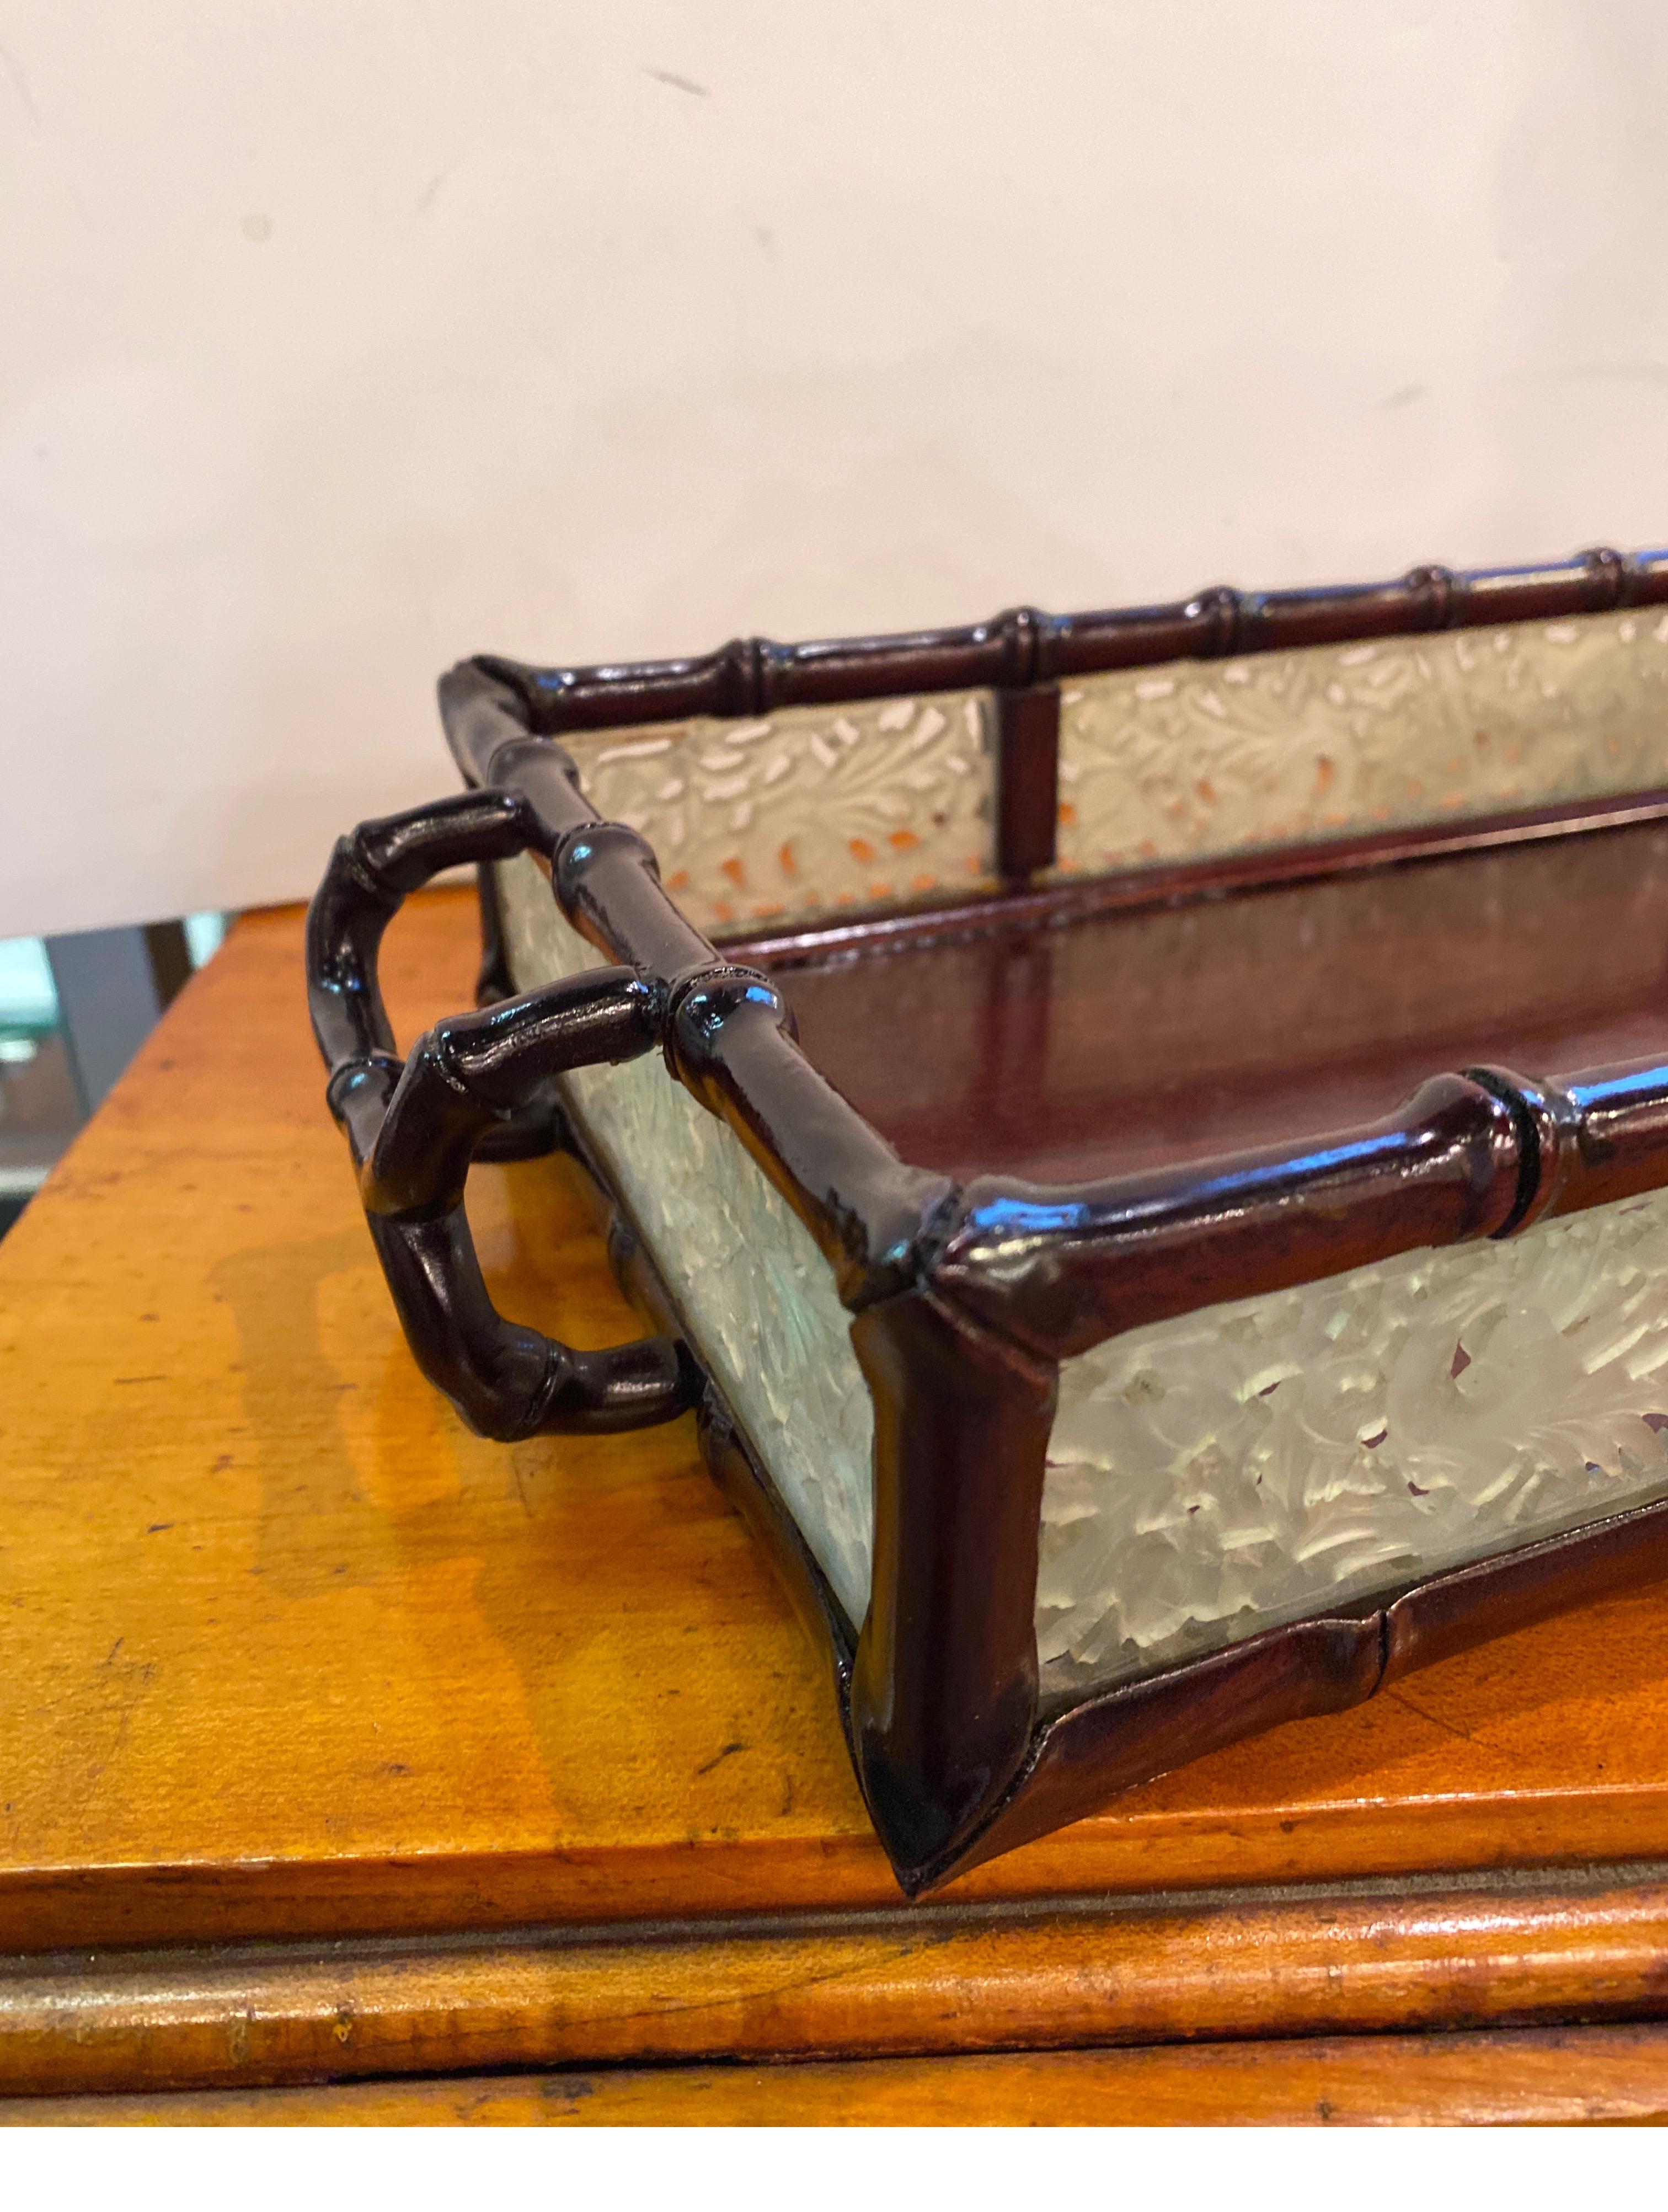 An antique Chinese carve wood and carved jade handled tray. The hand carved bamboo motif frame work with carved jade panels fitted all around. Marked on the underside China, dating this to the very early 20th century around 1910 16 inches handle to